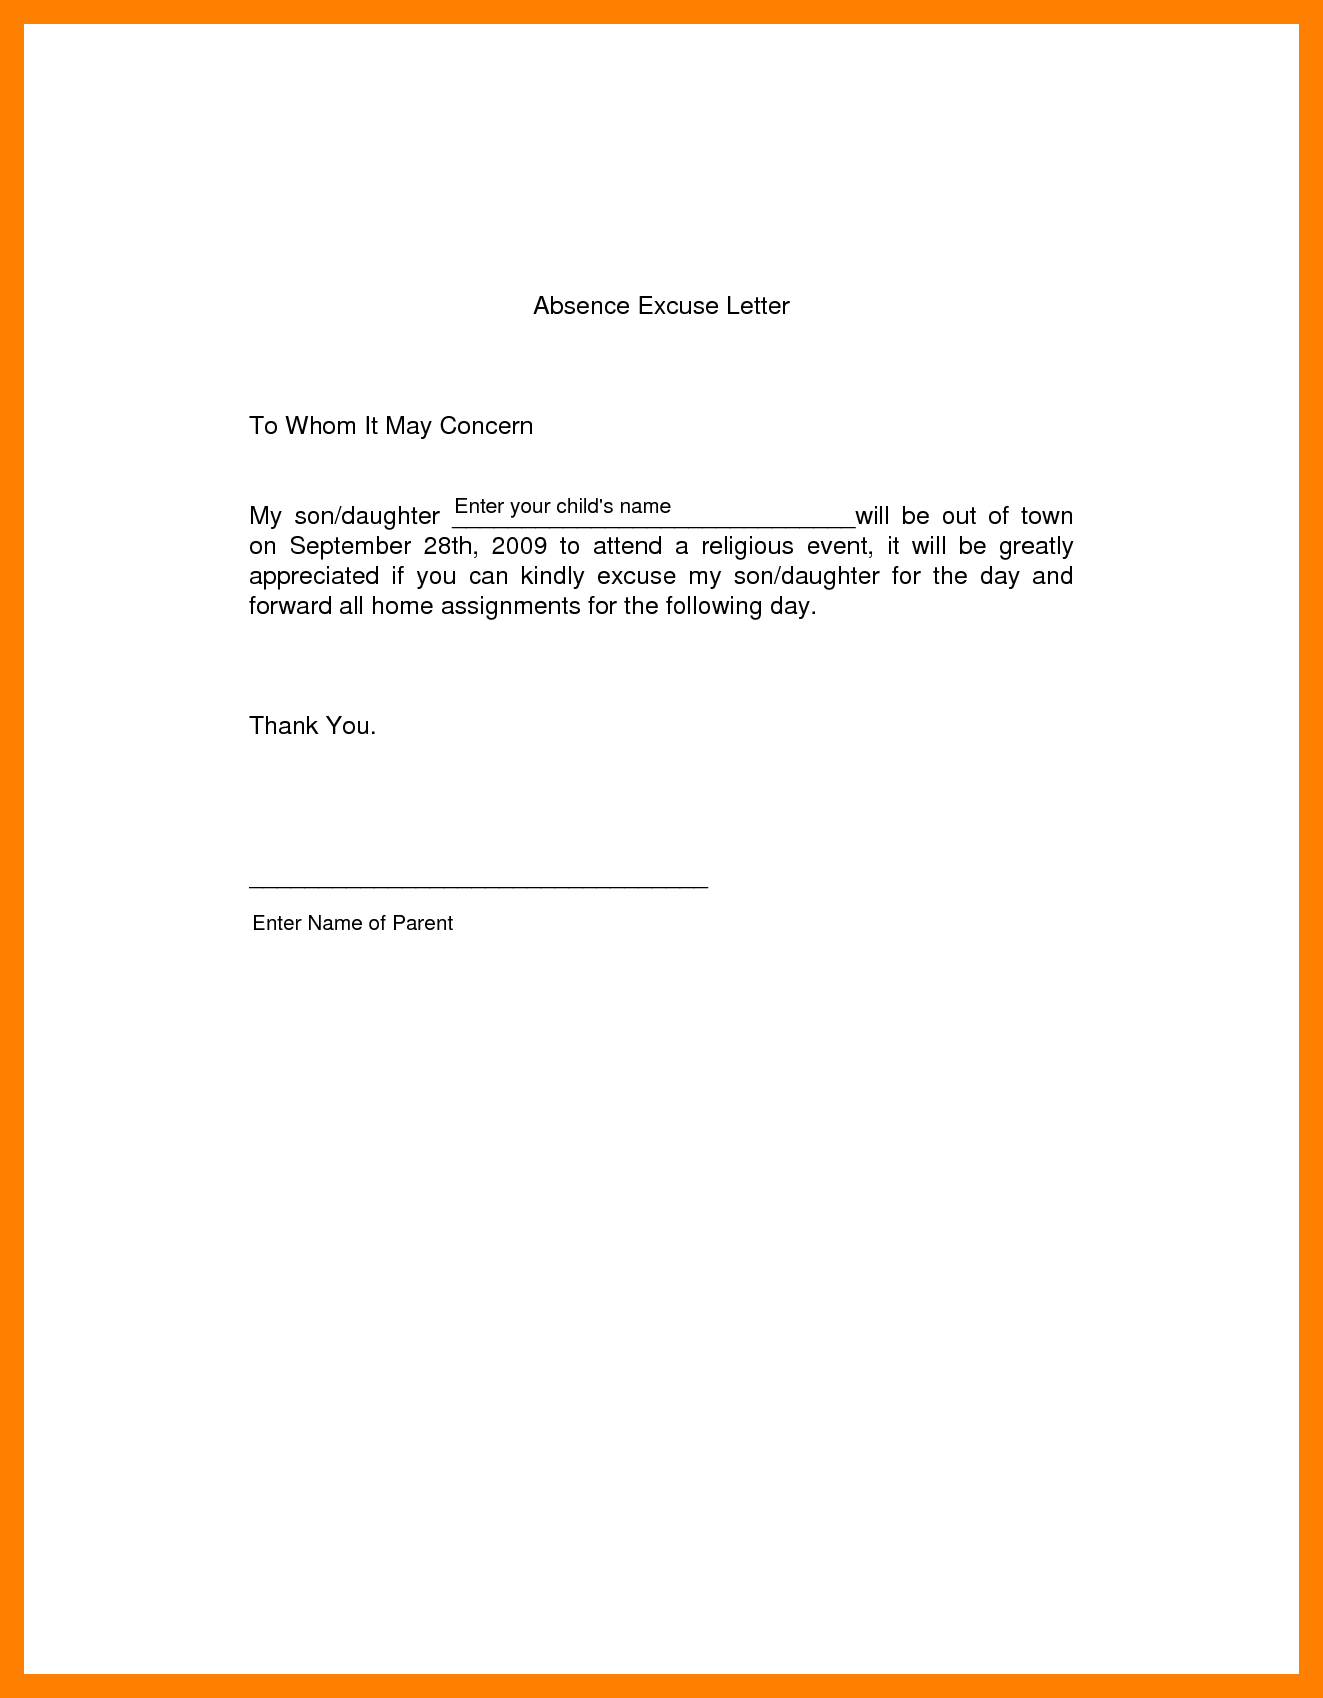 Absent Note For School Sample – Horizonconsulting.co Intended For Doctors Note For School Template